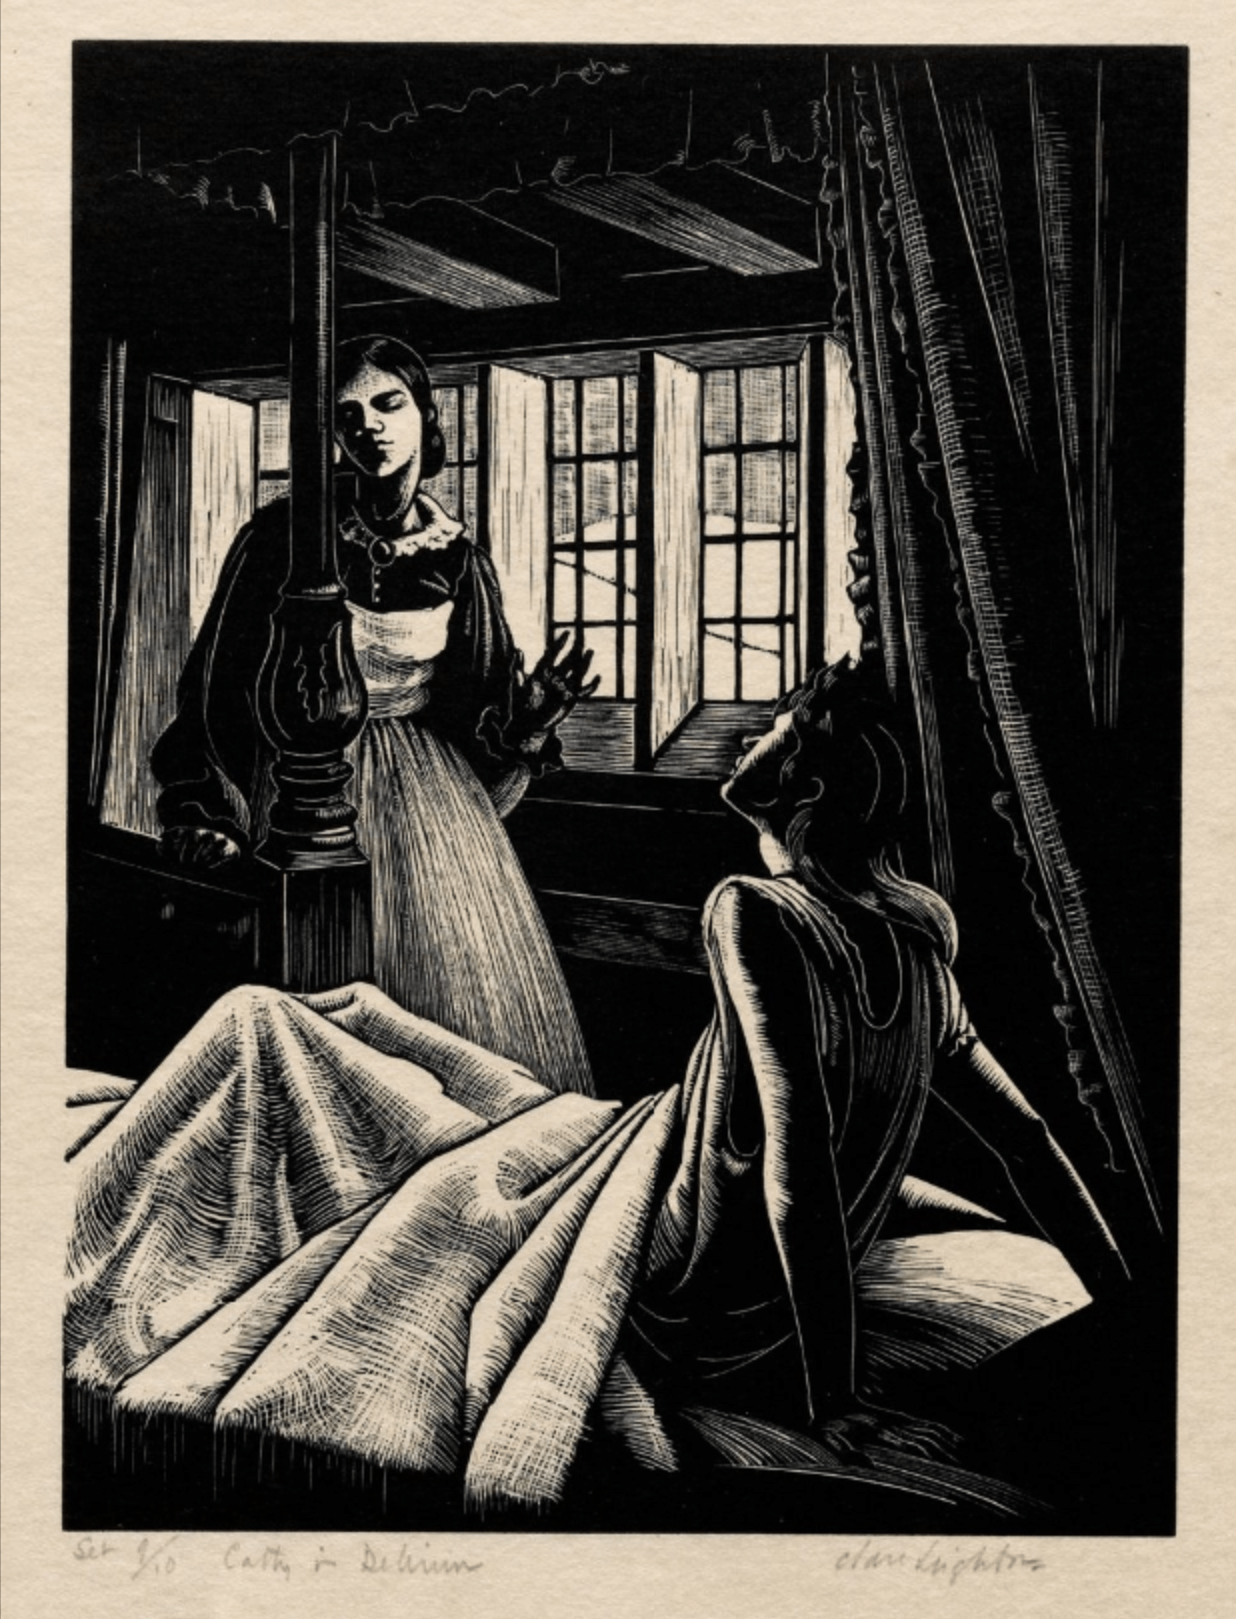 "Cathy in Delirium," printed in 1931 by Claire Leighton. A black and white print depicting a scene from Emily Bronte's "Wuthering Heights."